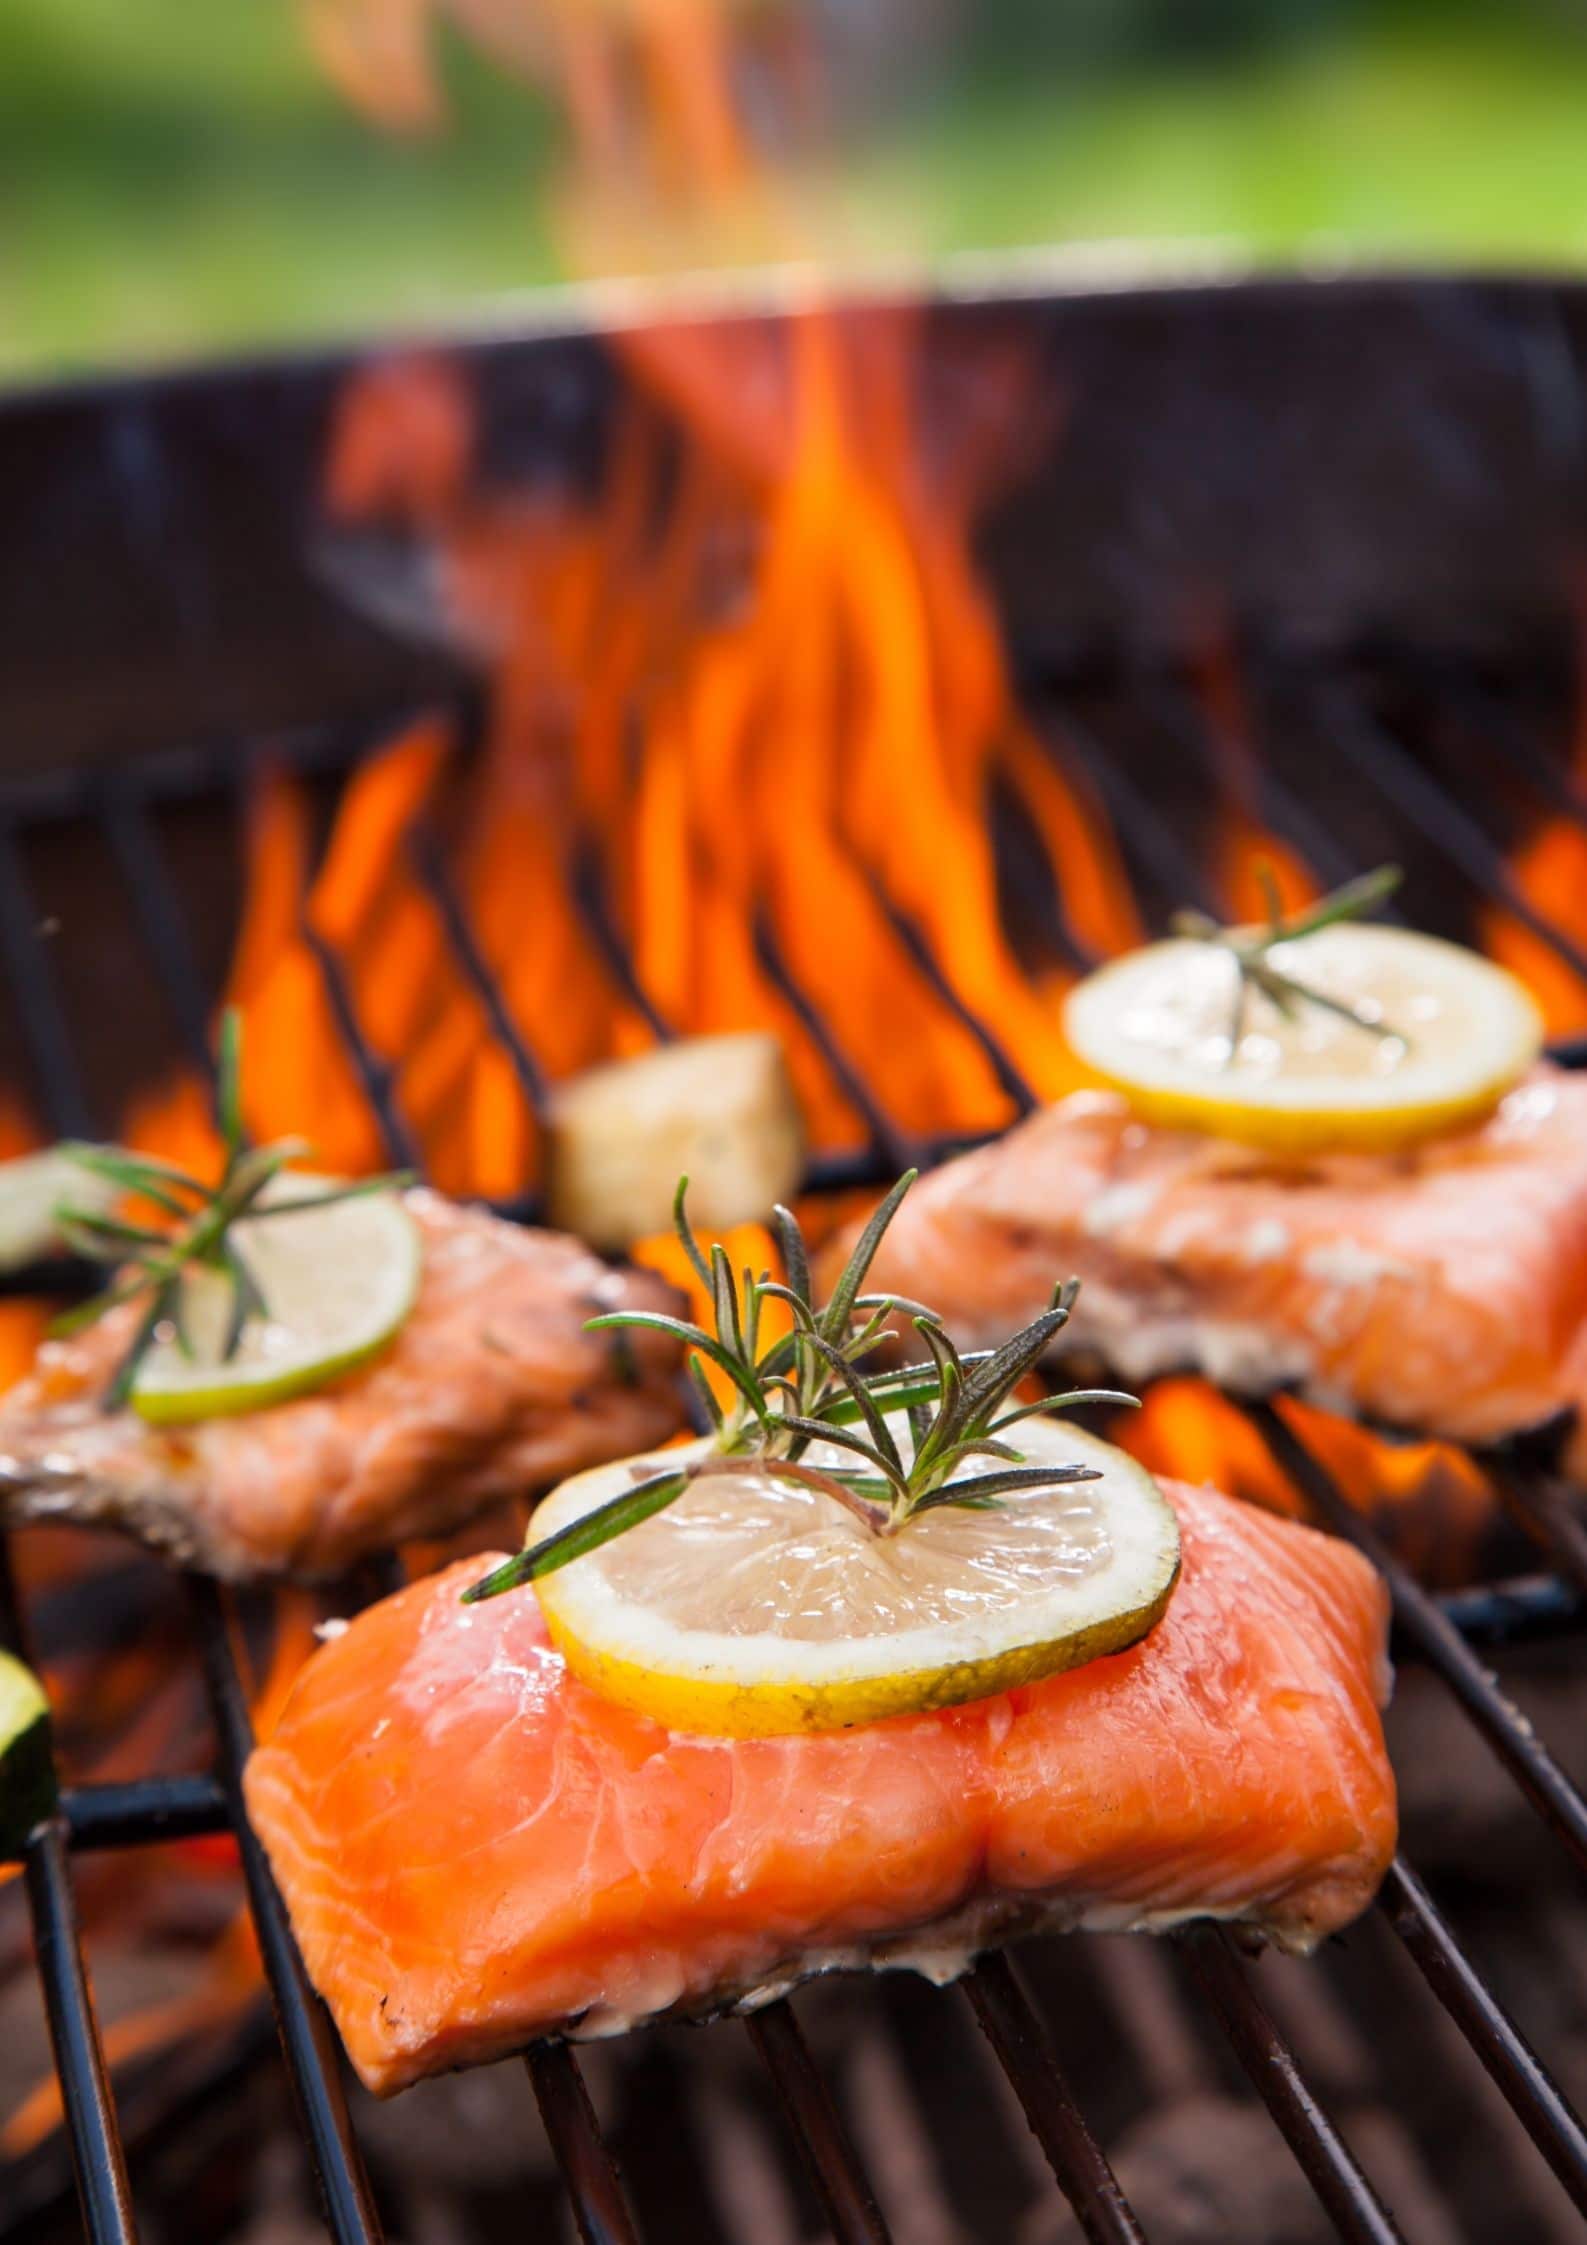 Grilling Salmon with an Amazing Taste